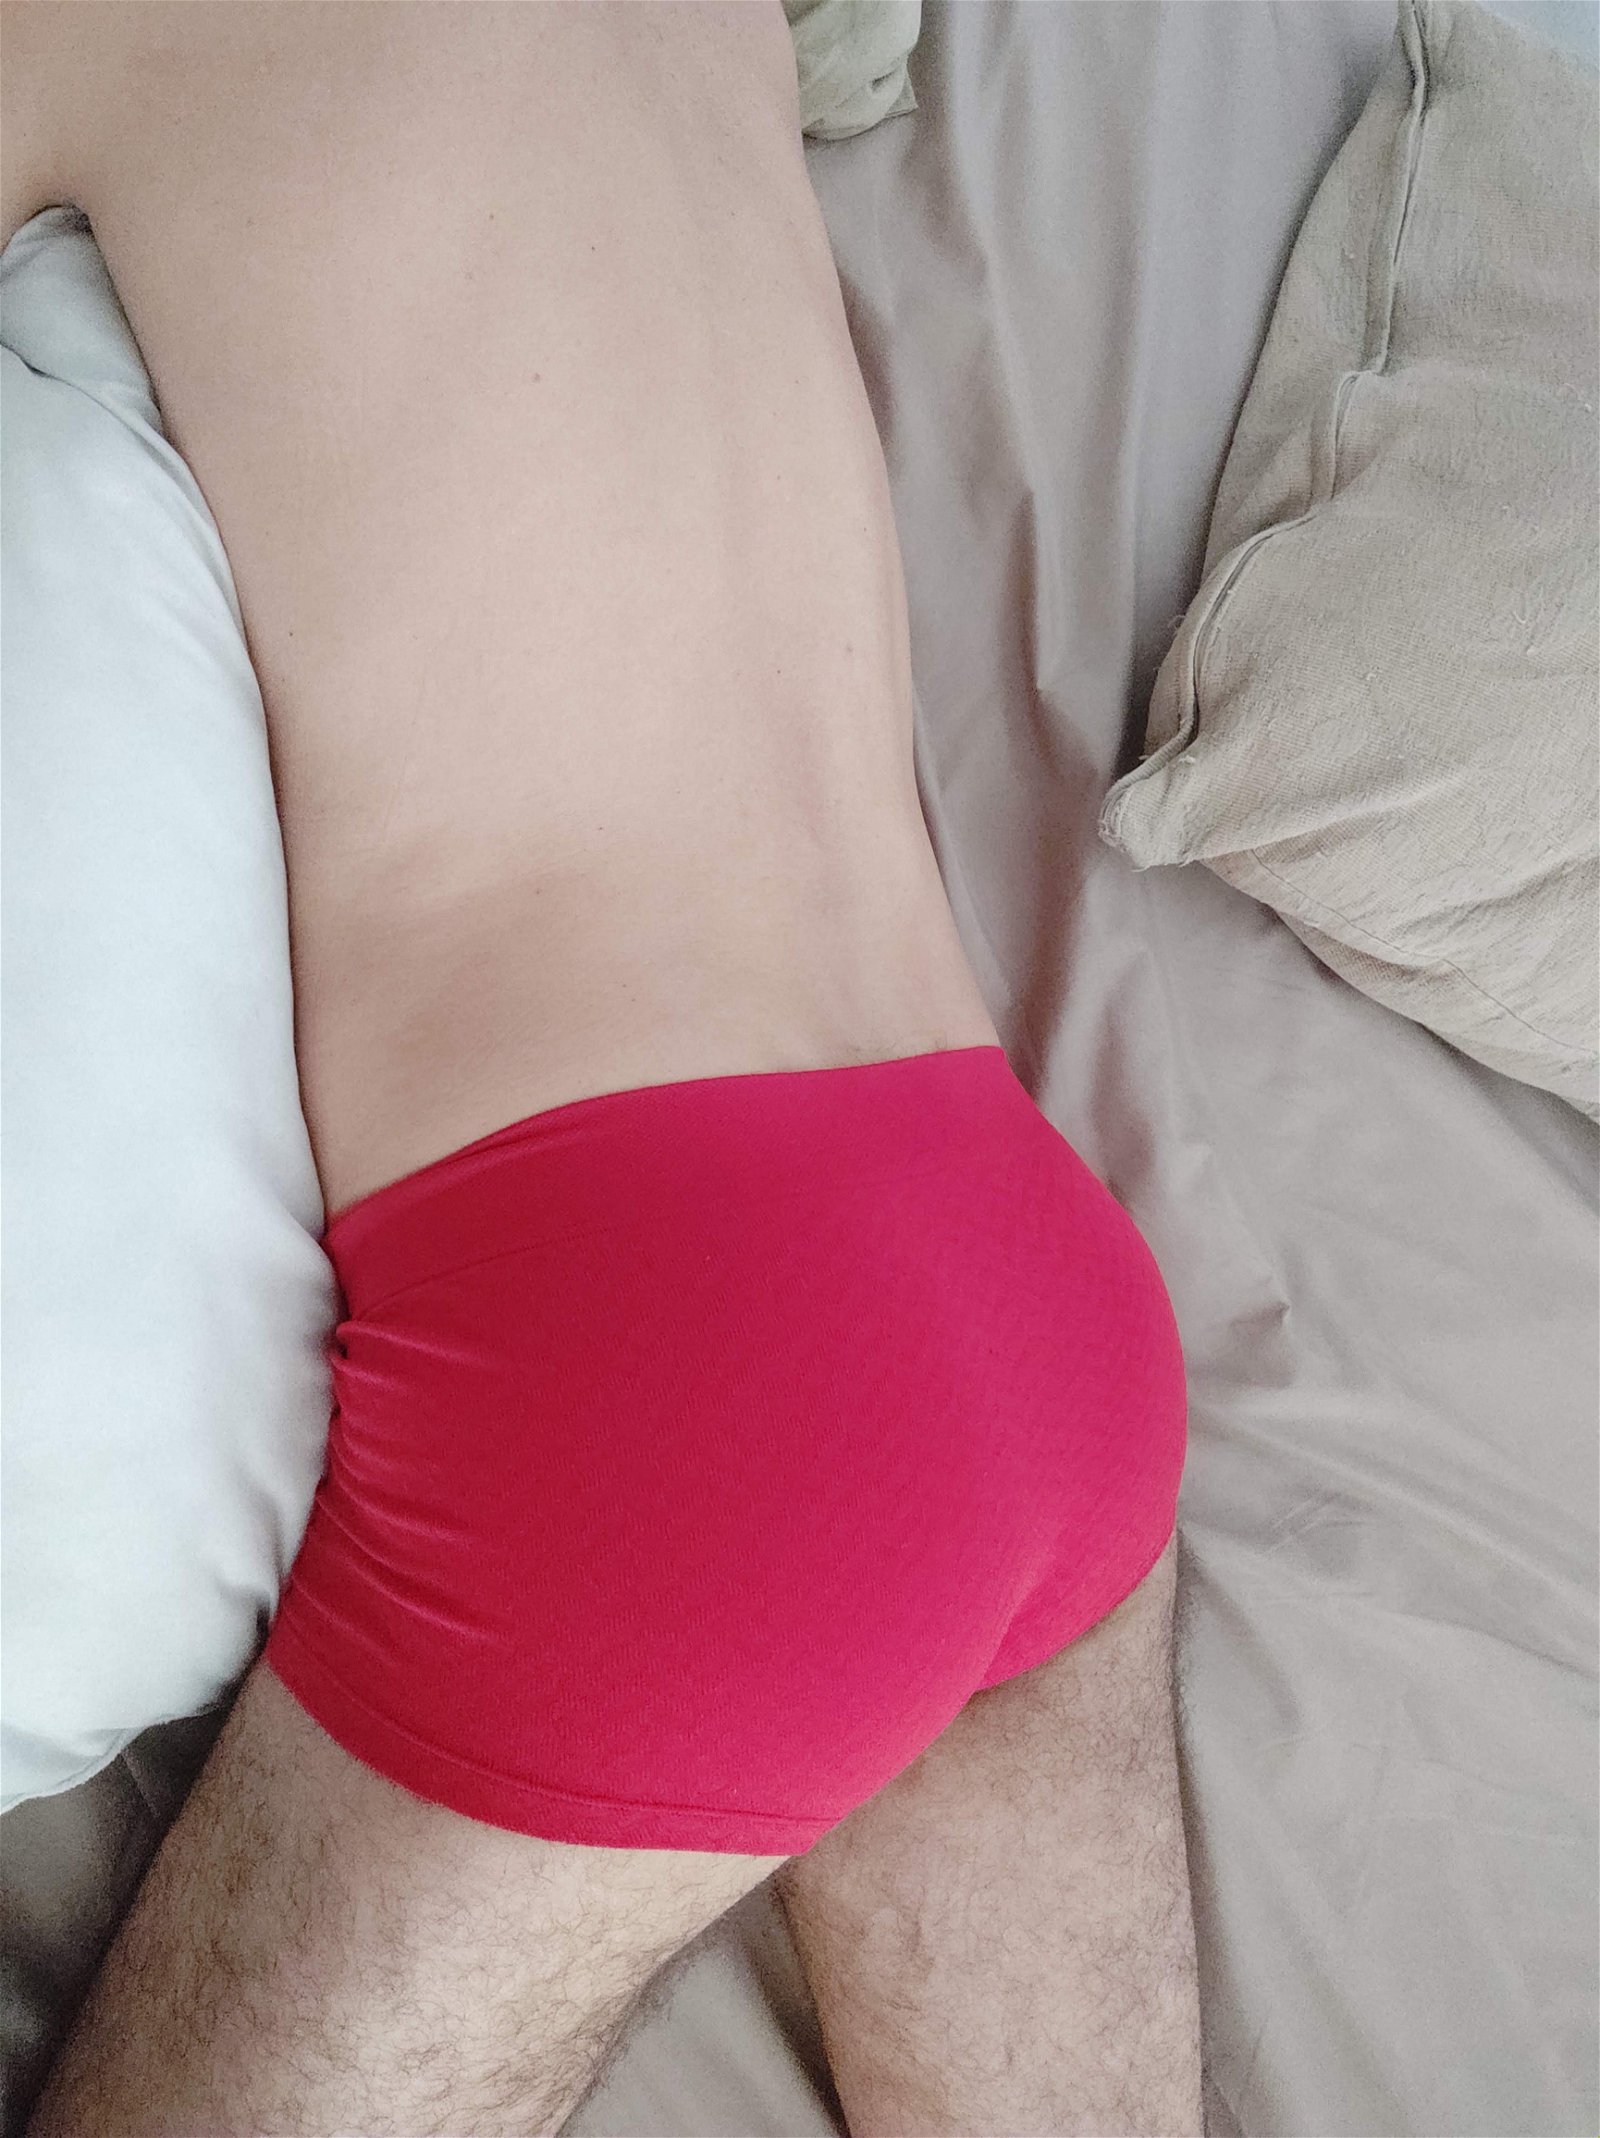 Photo by Queremos te provar! with the username @queremosteprovar, who is a verified user,  March 10, 2022 at 1:29 PM. The post is about the topic Bisexual and the text says 'Hello guys! What about some asses in red for you? Hope you all enjoy it! 😇😘'